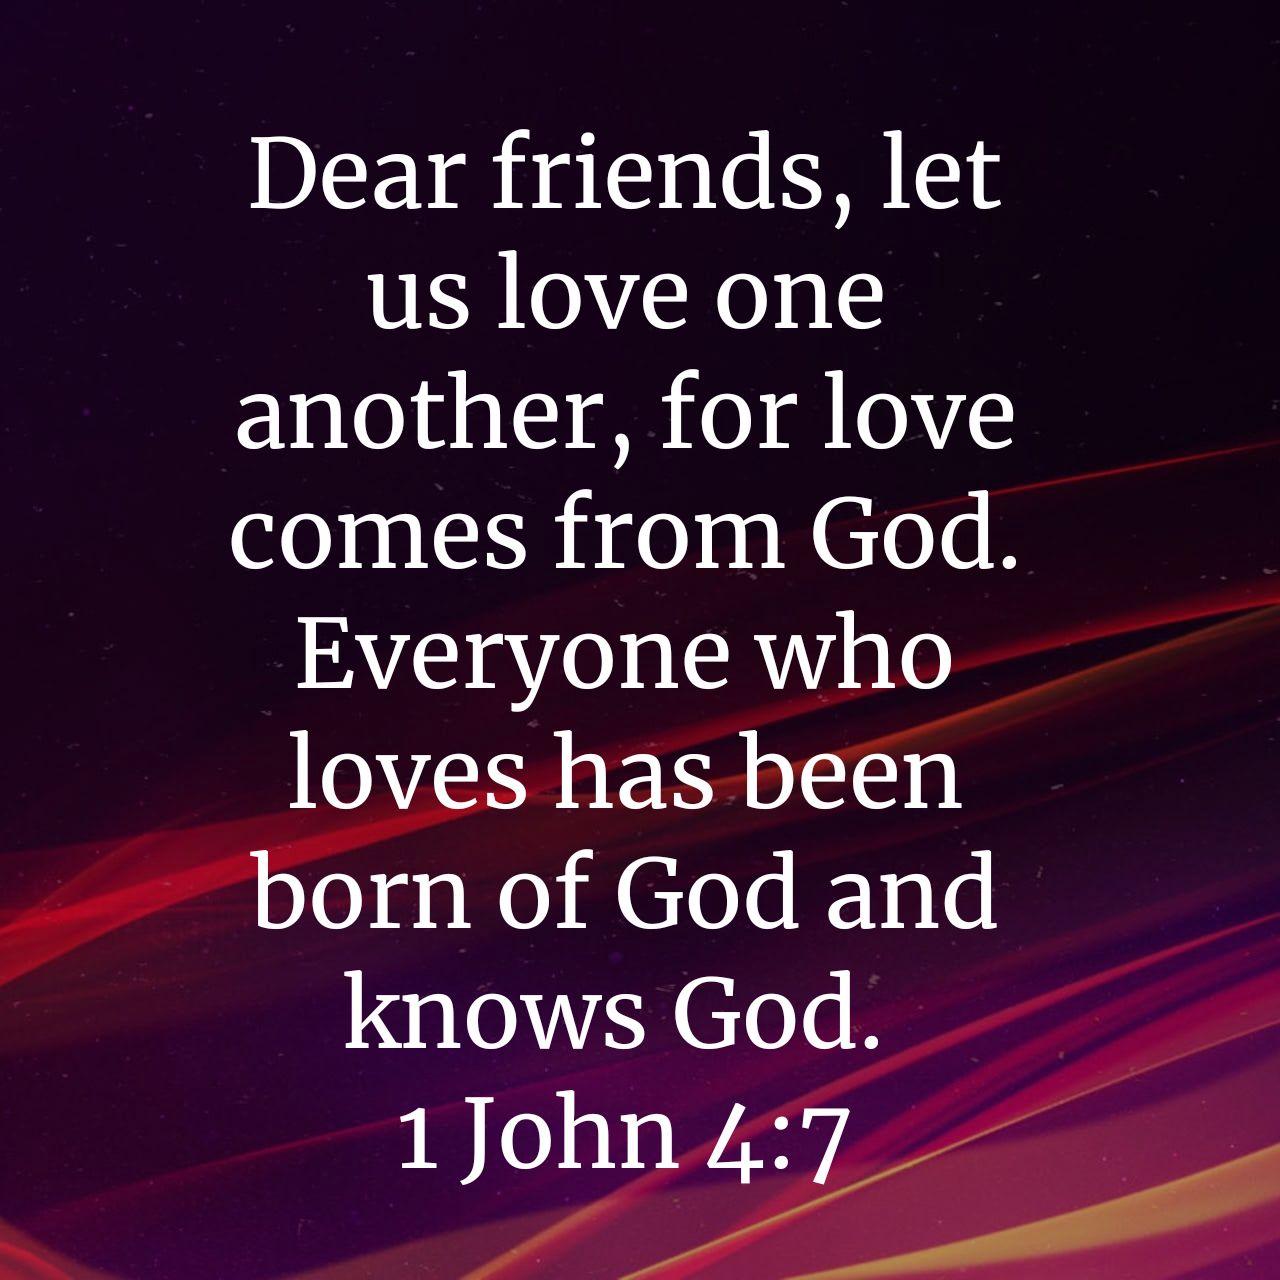 Dear friends, let us love one another, for love comes from God. Everyone who loves has been born of God and knows God. 1 John 4:7